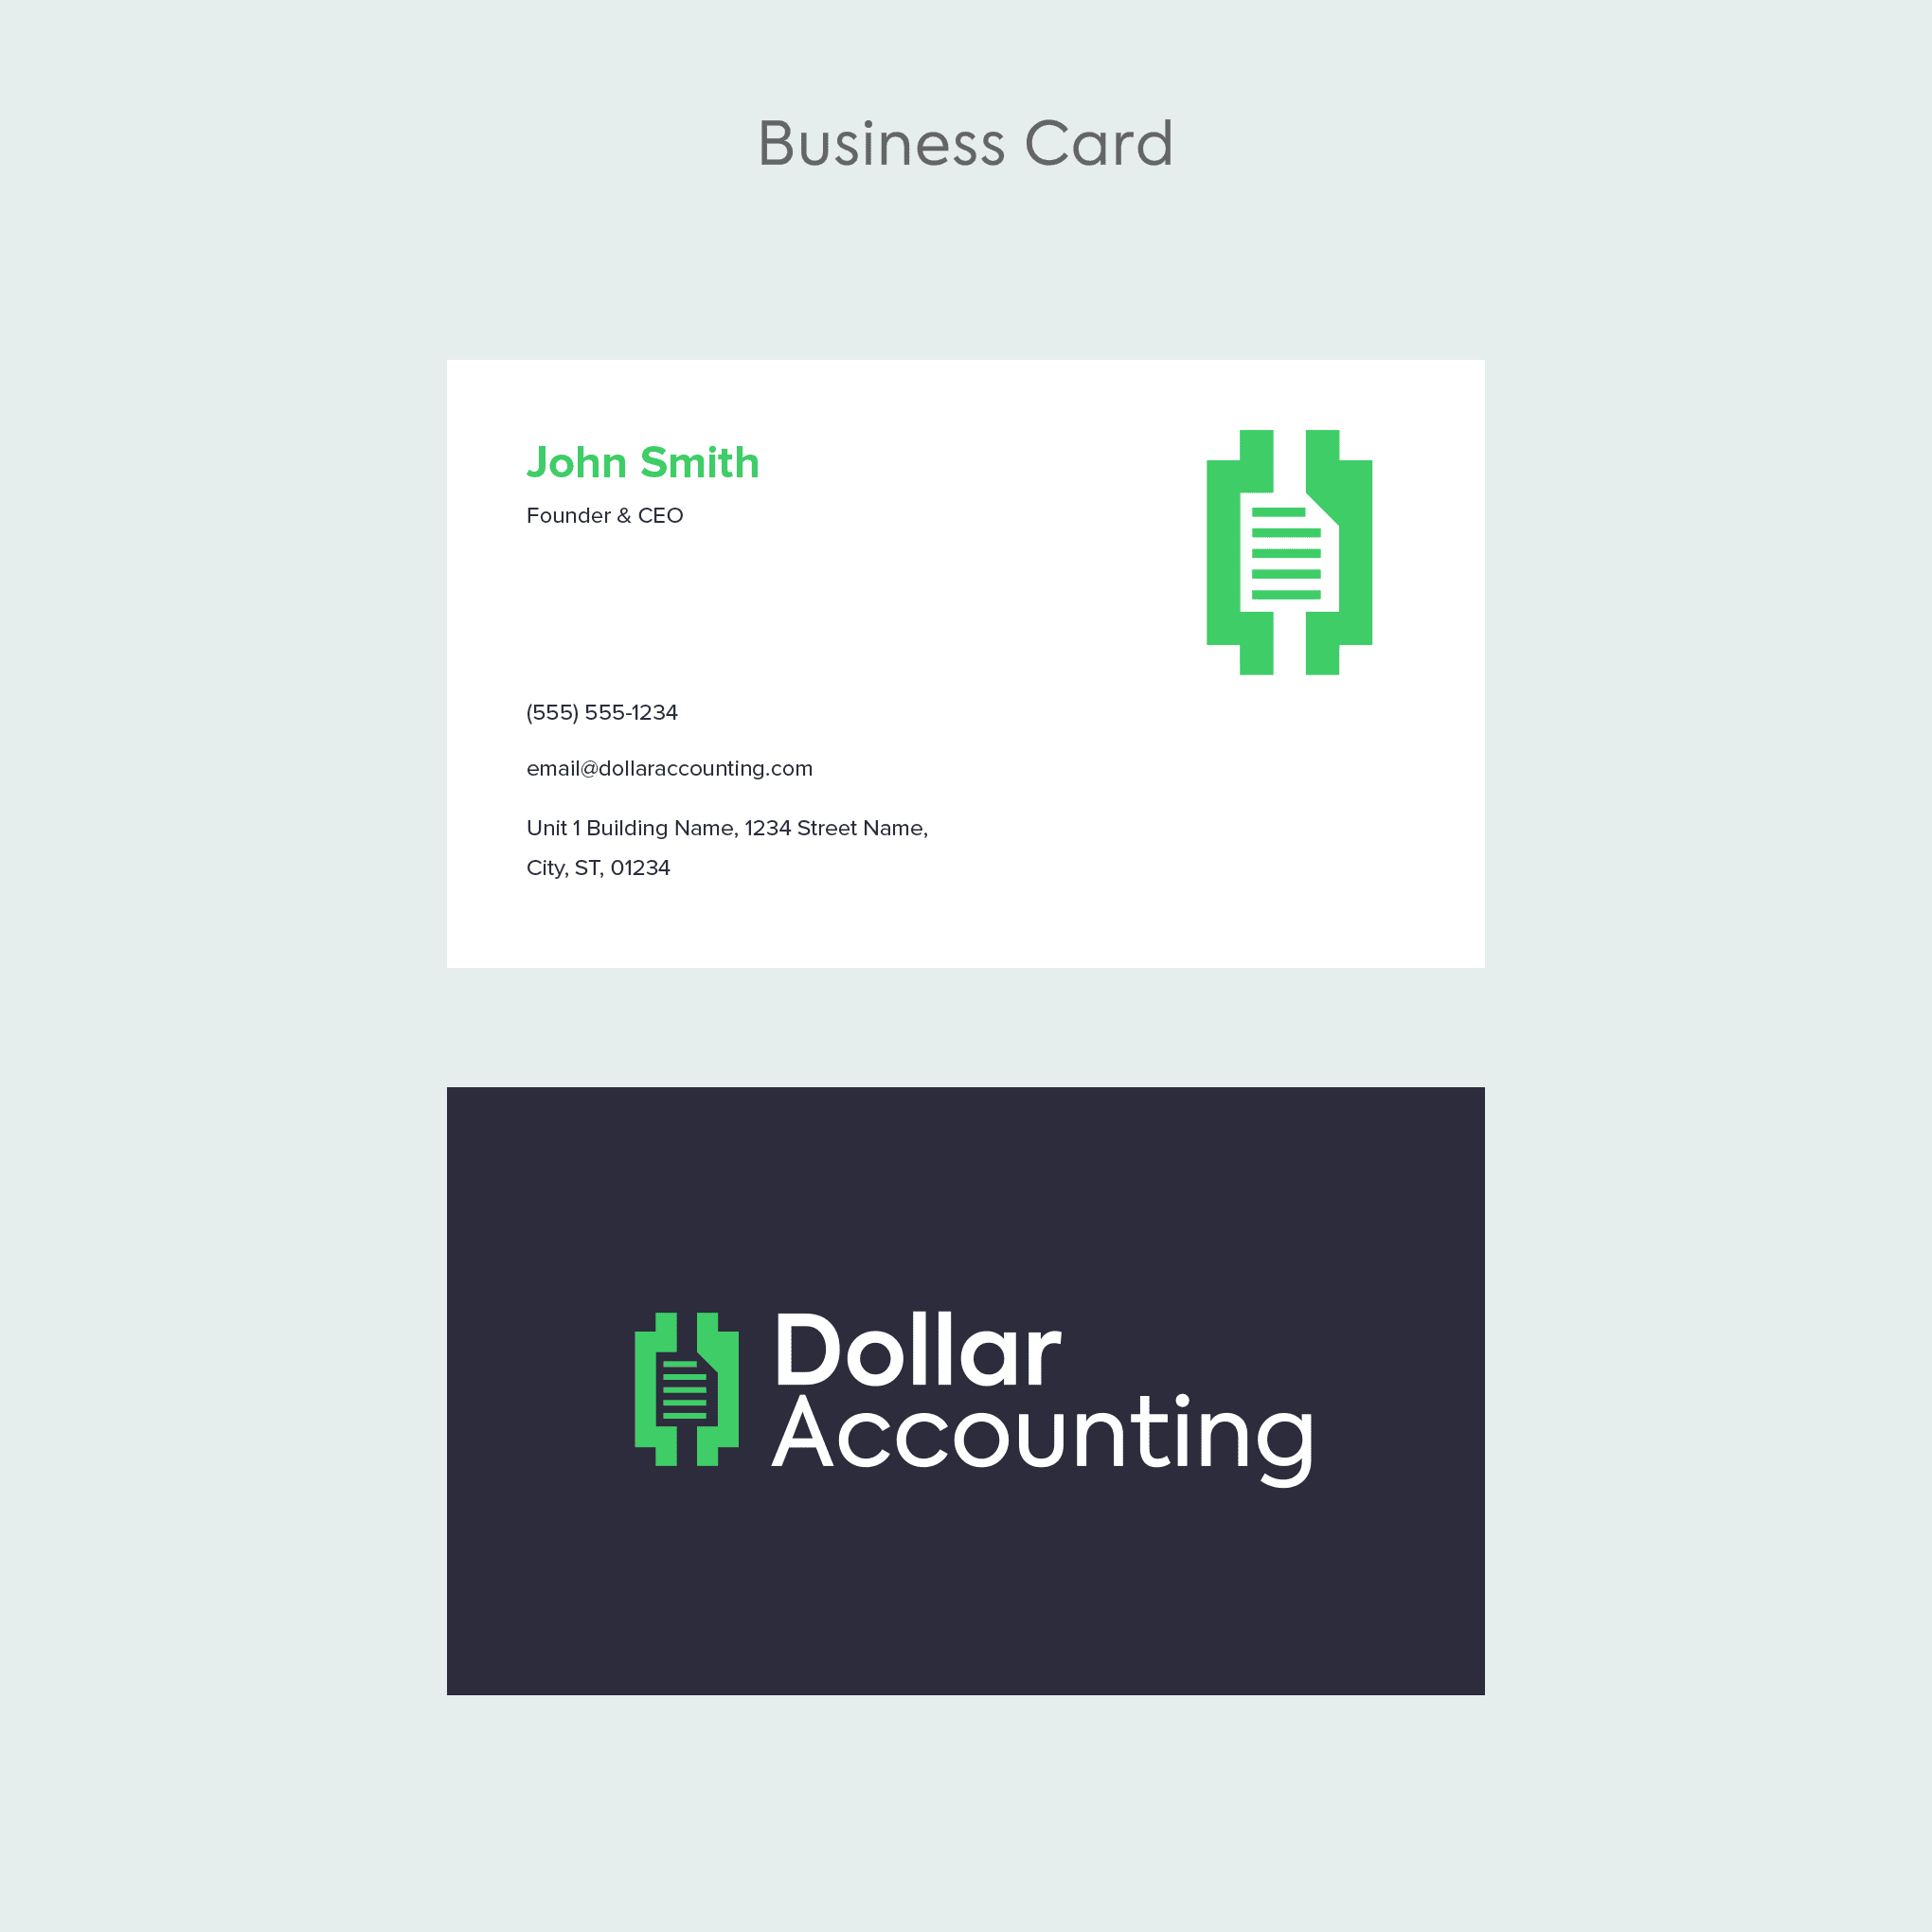 04 - Business Card Template (5)